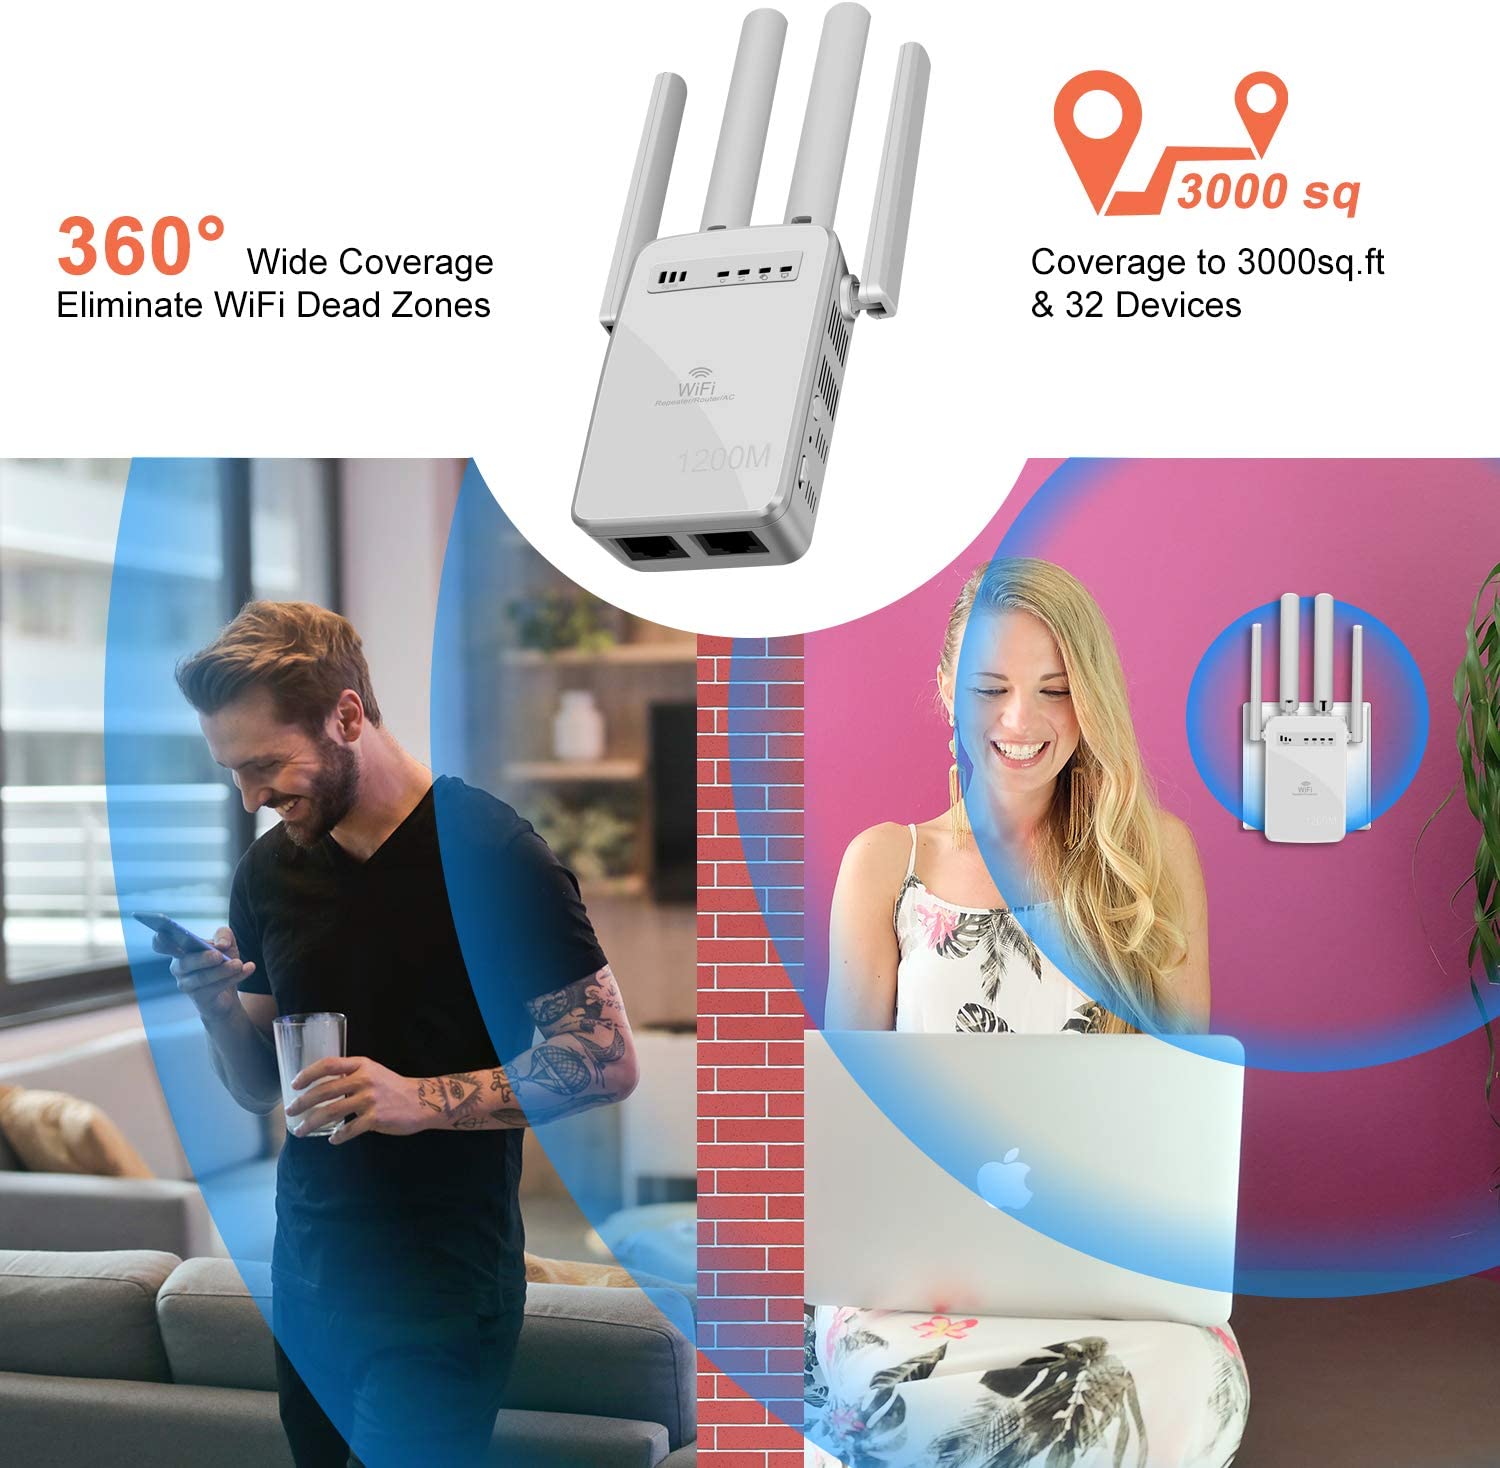 WiFi Range Extender,1200 Mbps Wireless Signal Repeater Booster,2.4 & 5GHz Dual Band Network,for WiFi Internet Connection , 2 LAN/Ethernet, 4 Antennas Coverage to 3000sq.ft & 32 Devices